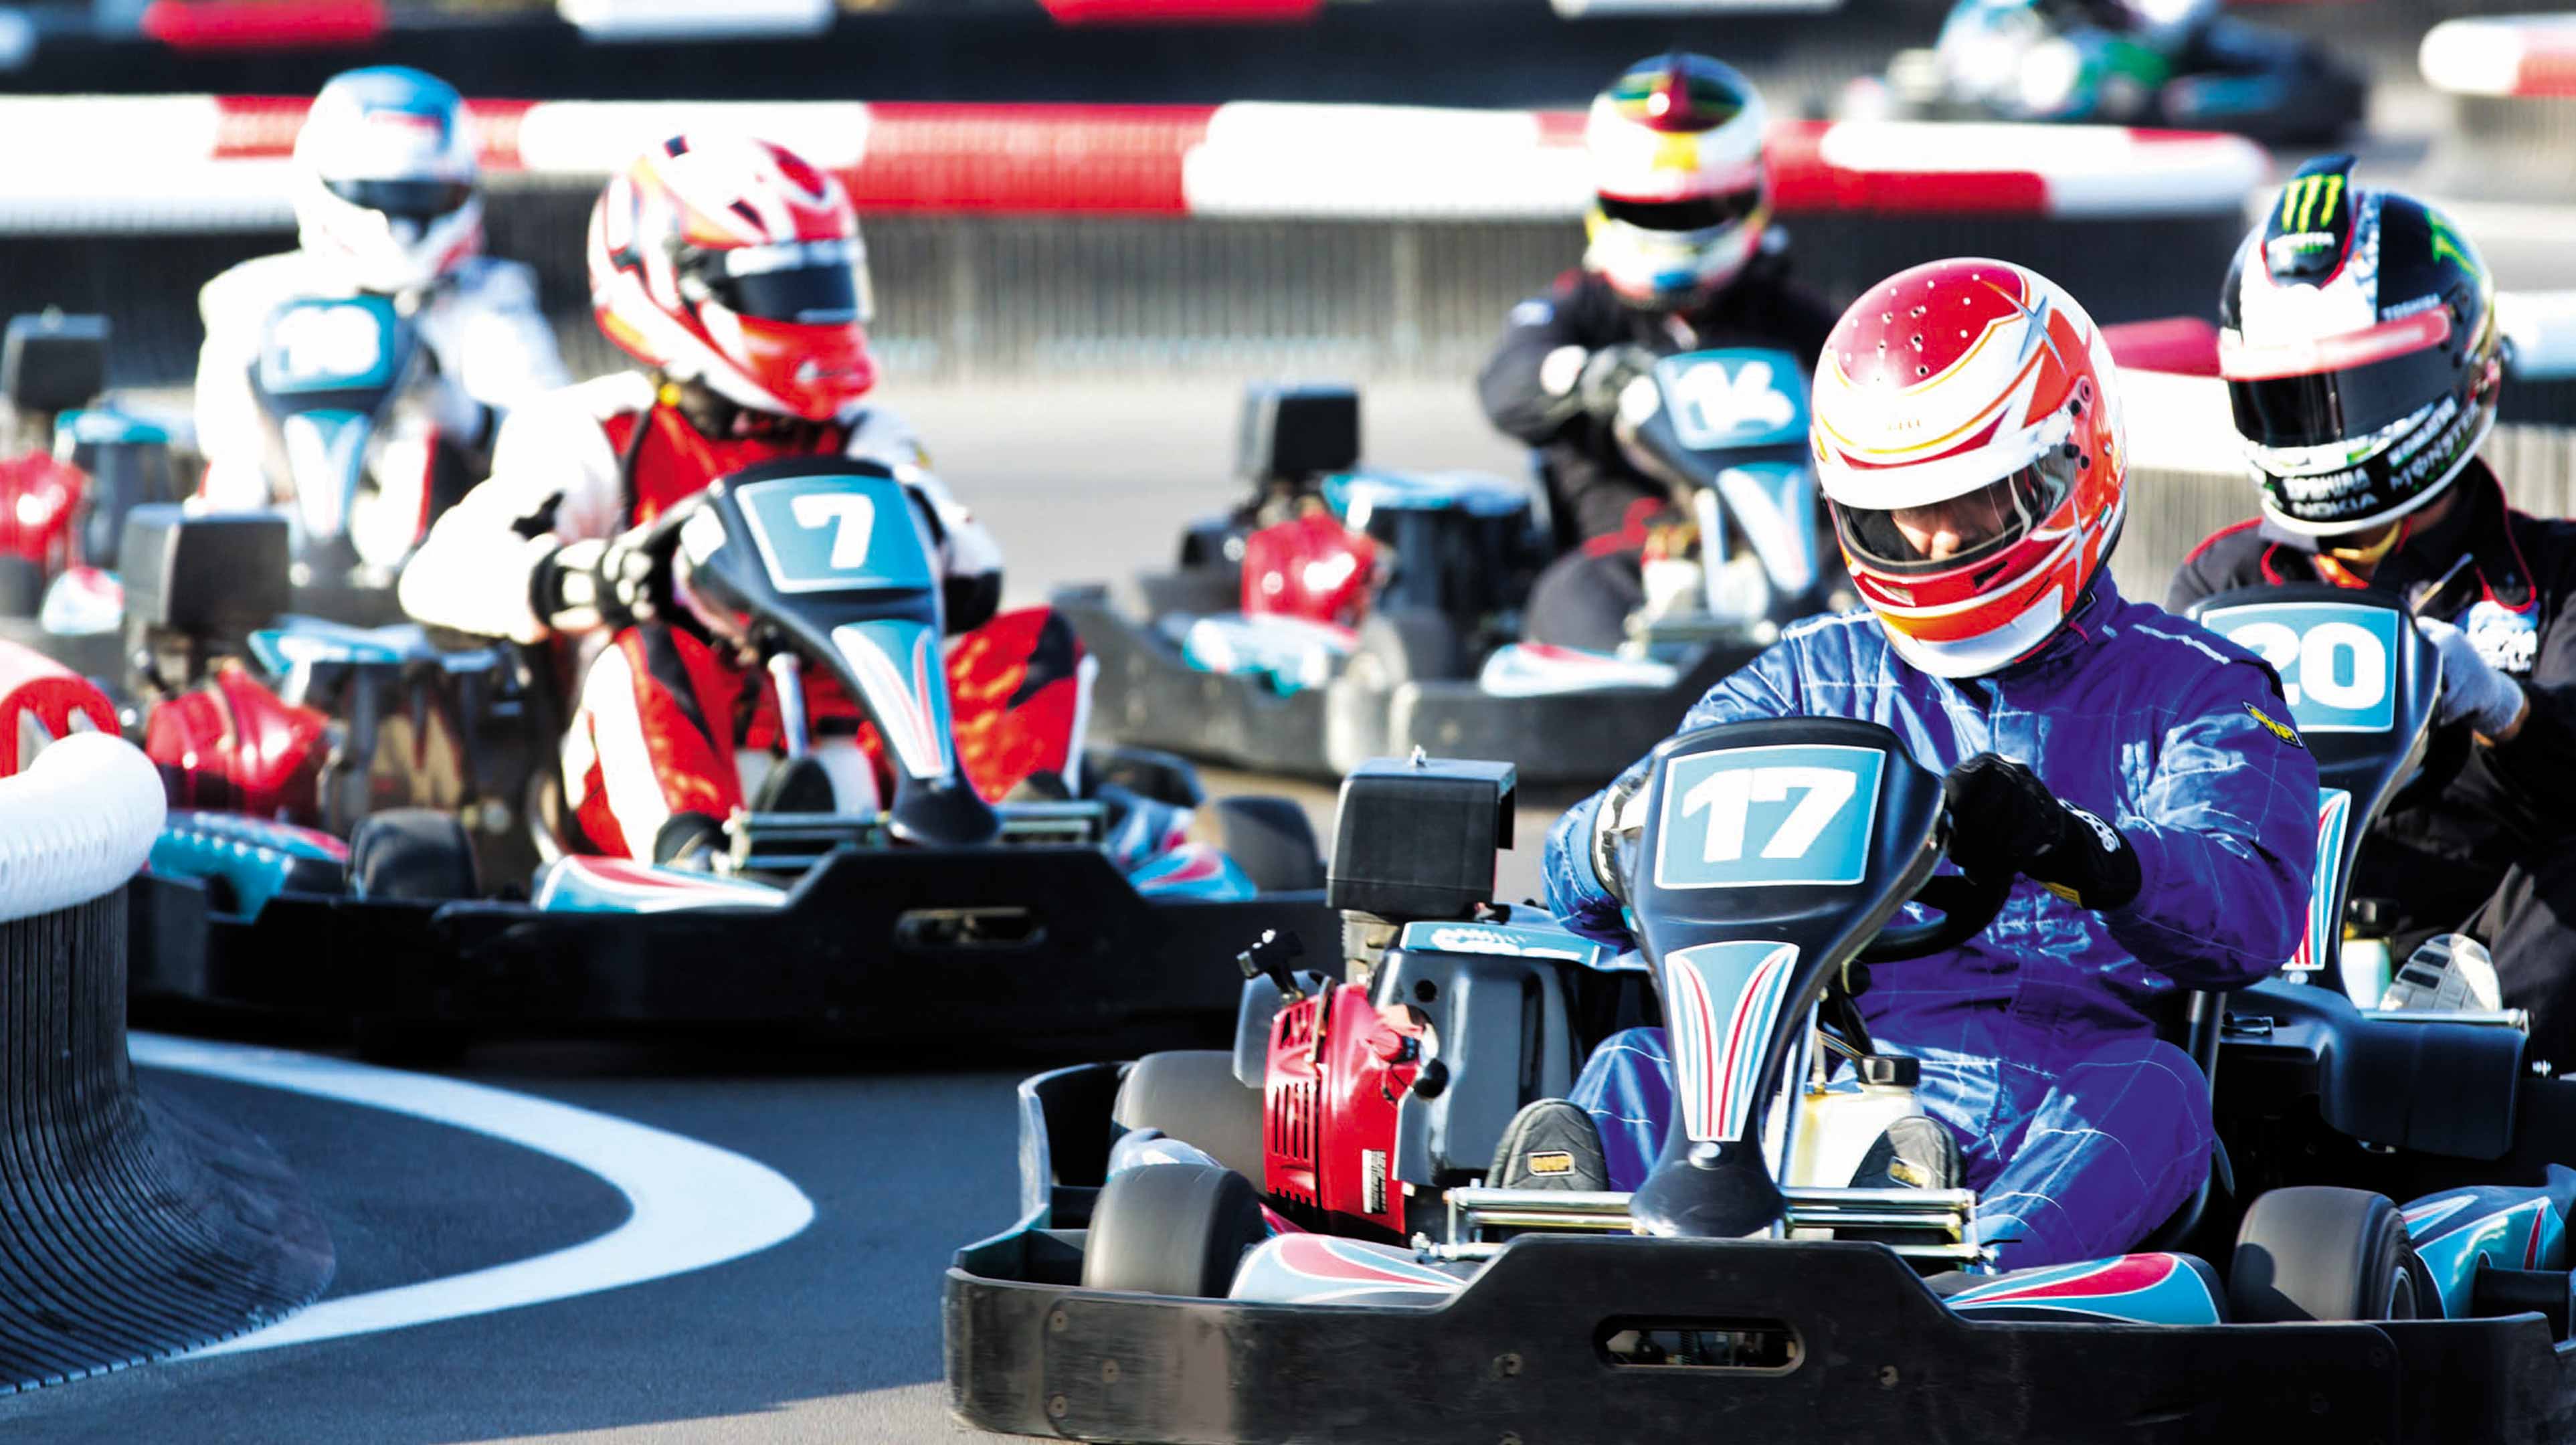 3. Challenge each other at Yas Kartzone